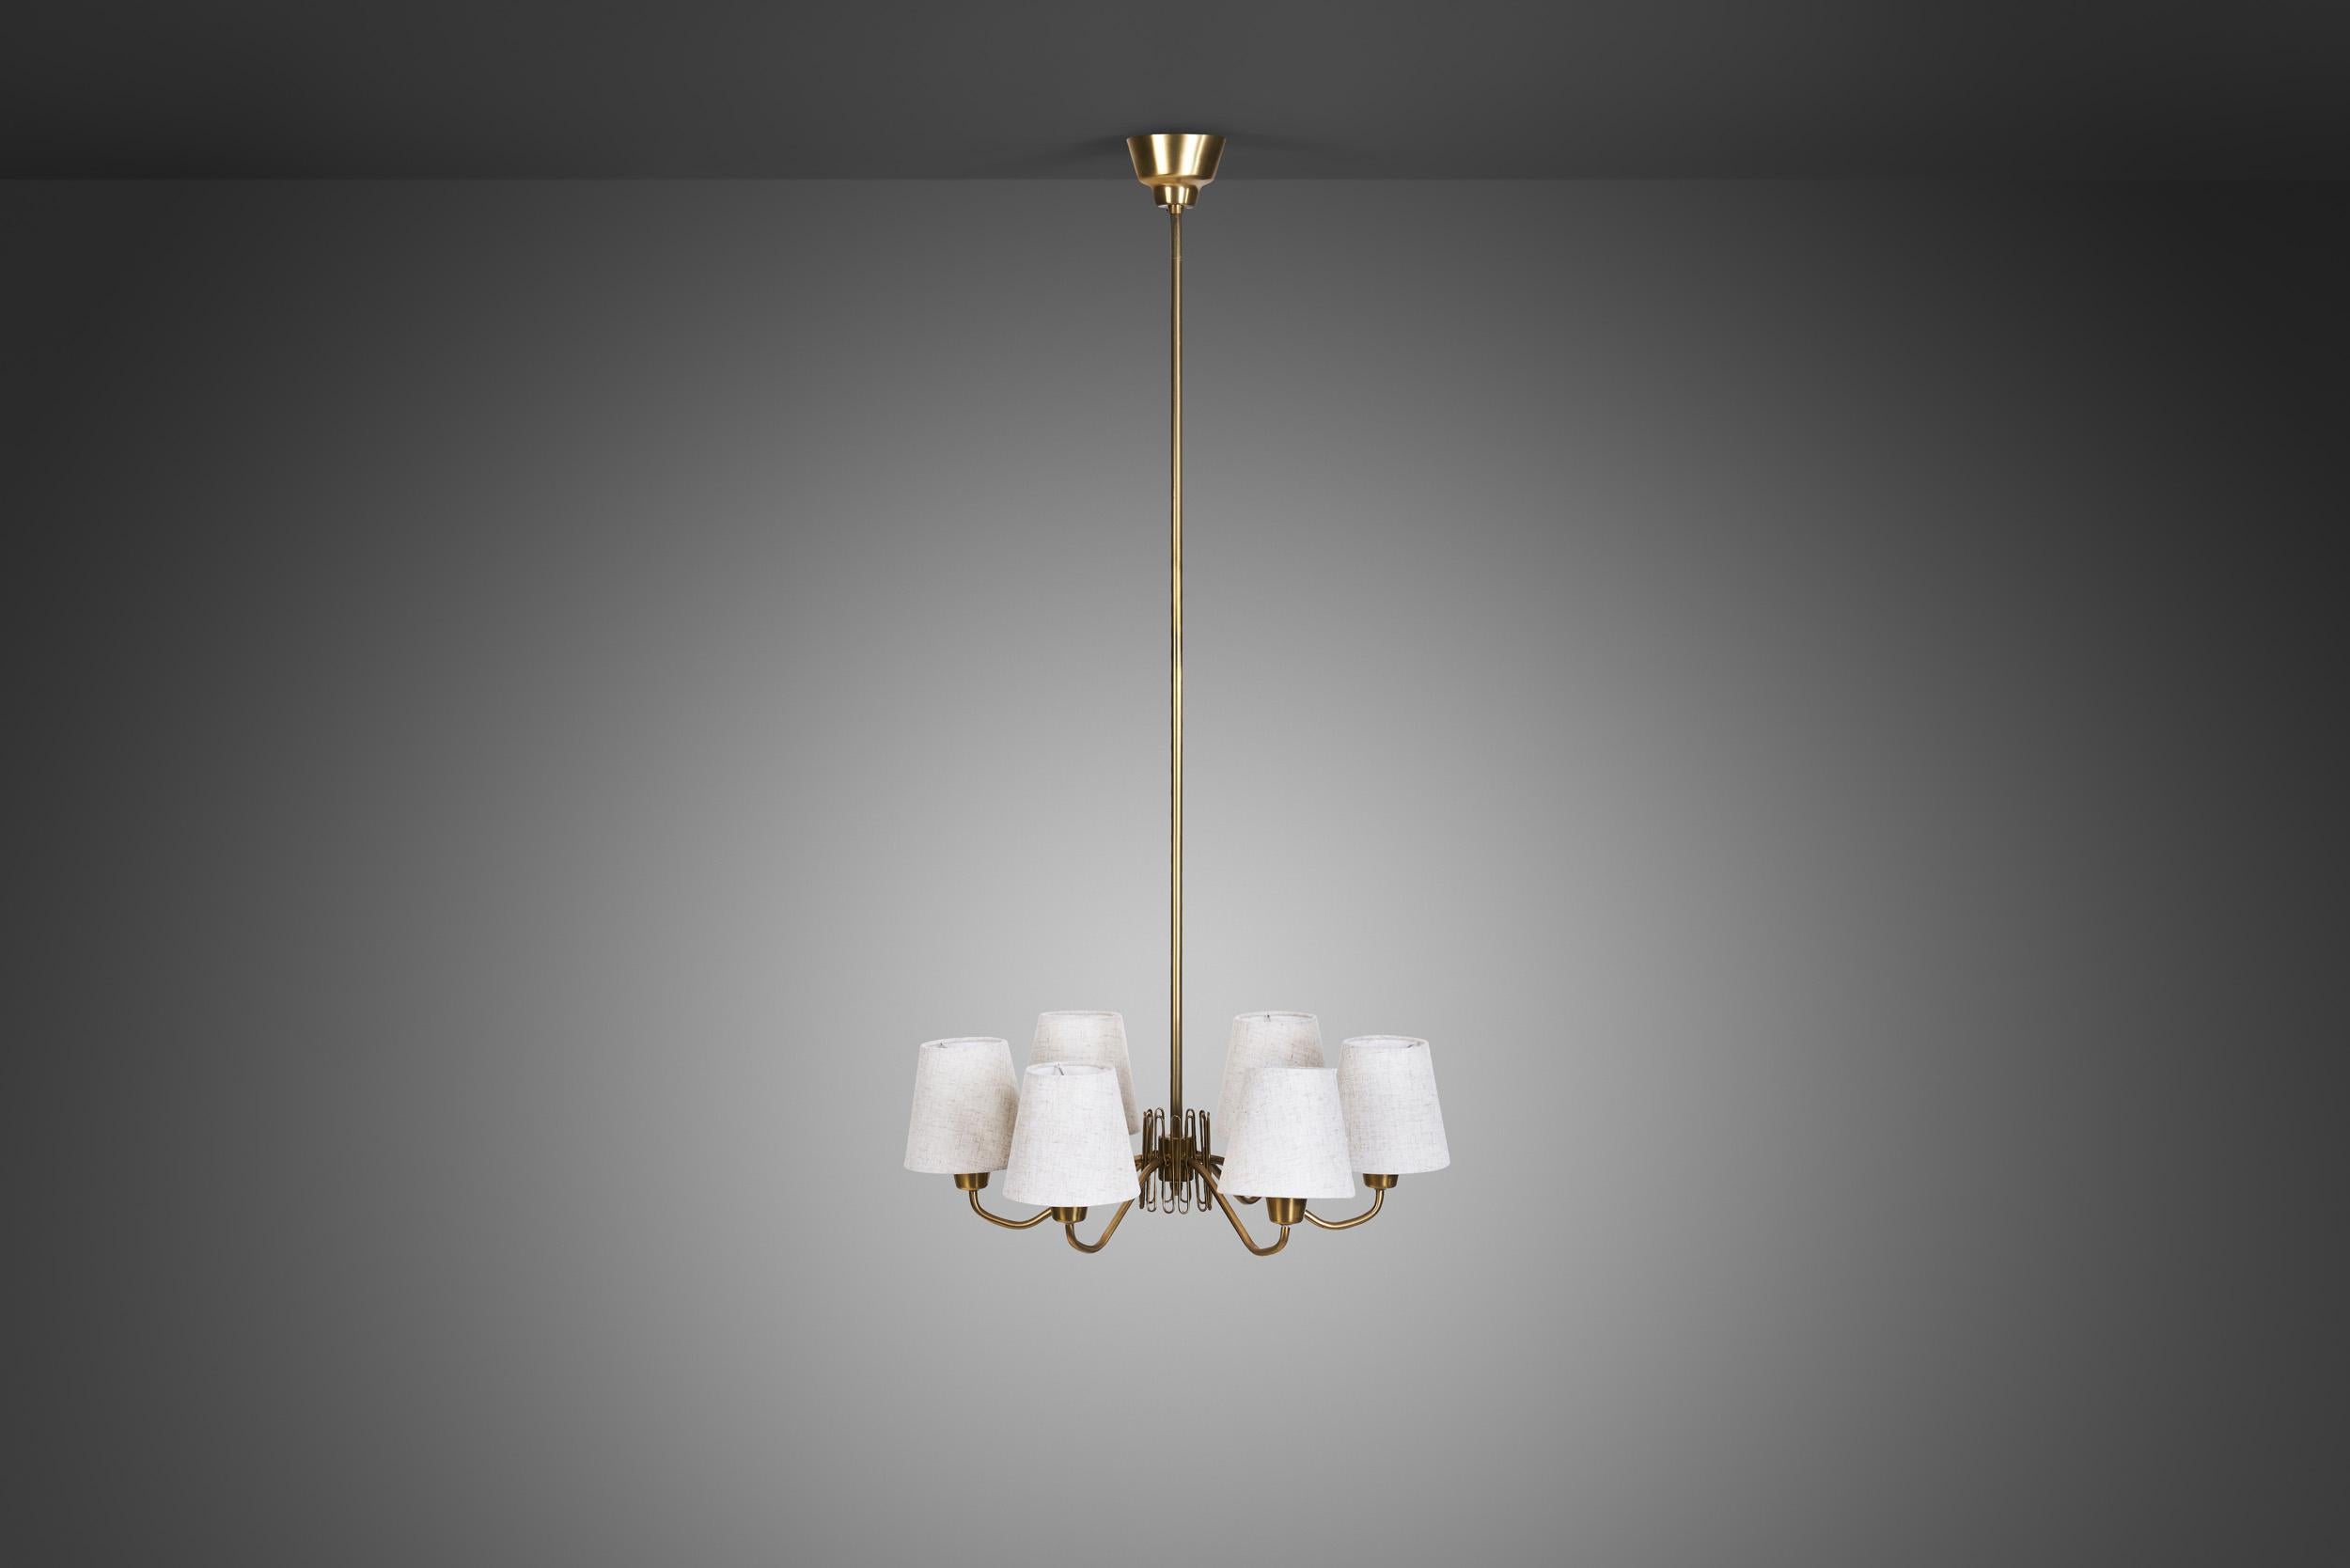 Swedish Modern Brass Ceiling Light with Fabric Shades, Sweden Mid-20th Century For Sale 1